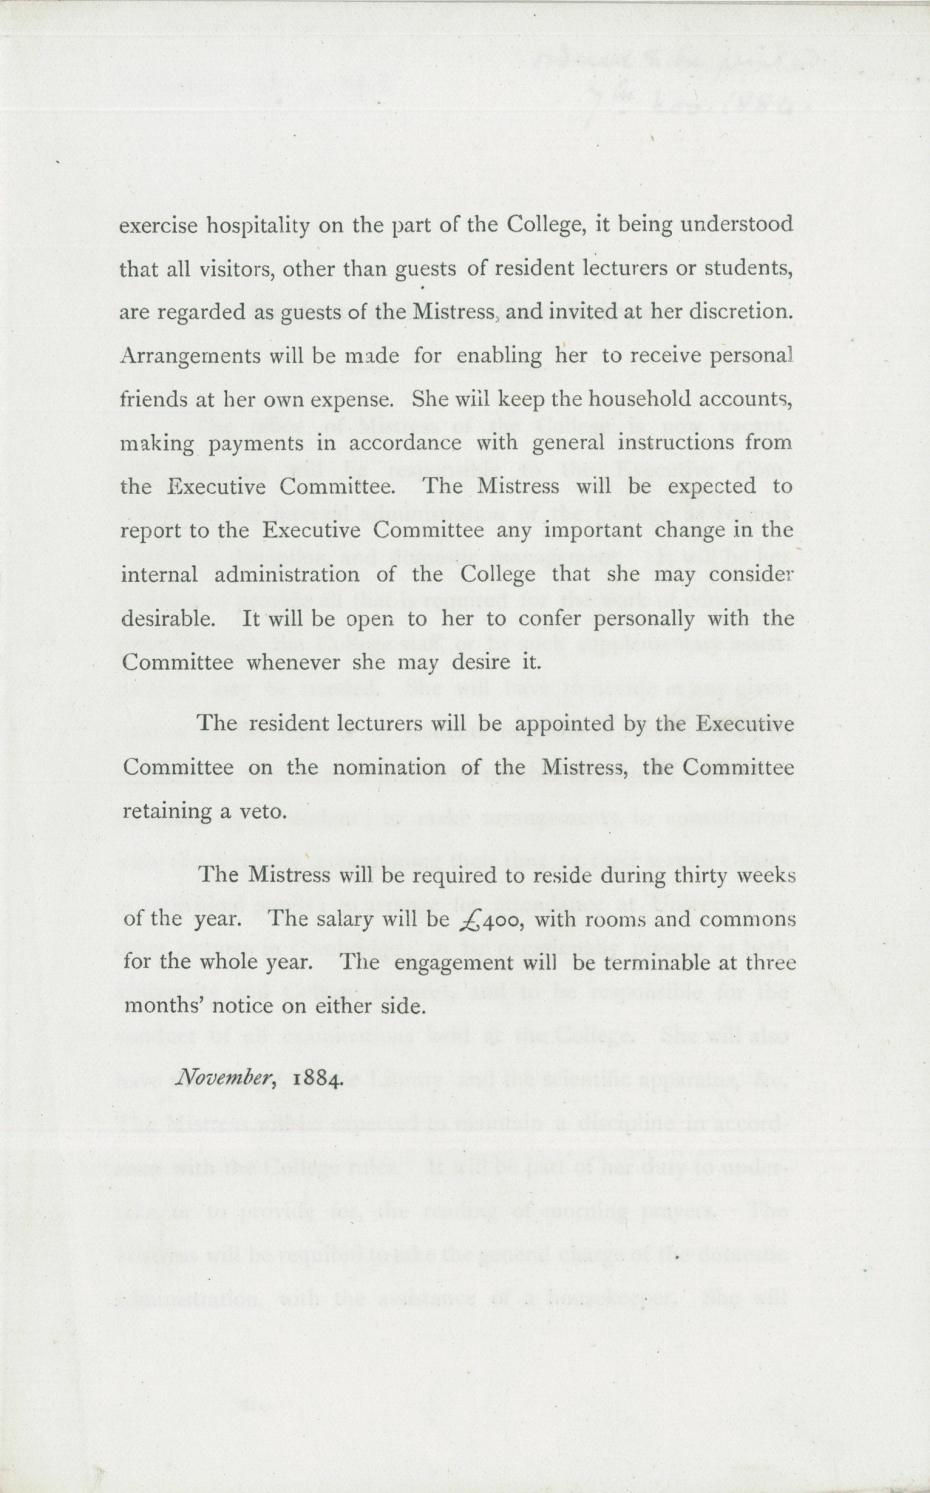 Printed duties of the Mistress, 1884 (archive reference: GCGB 2/1/8).